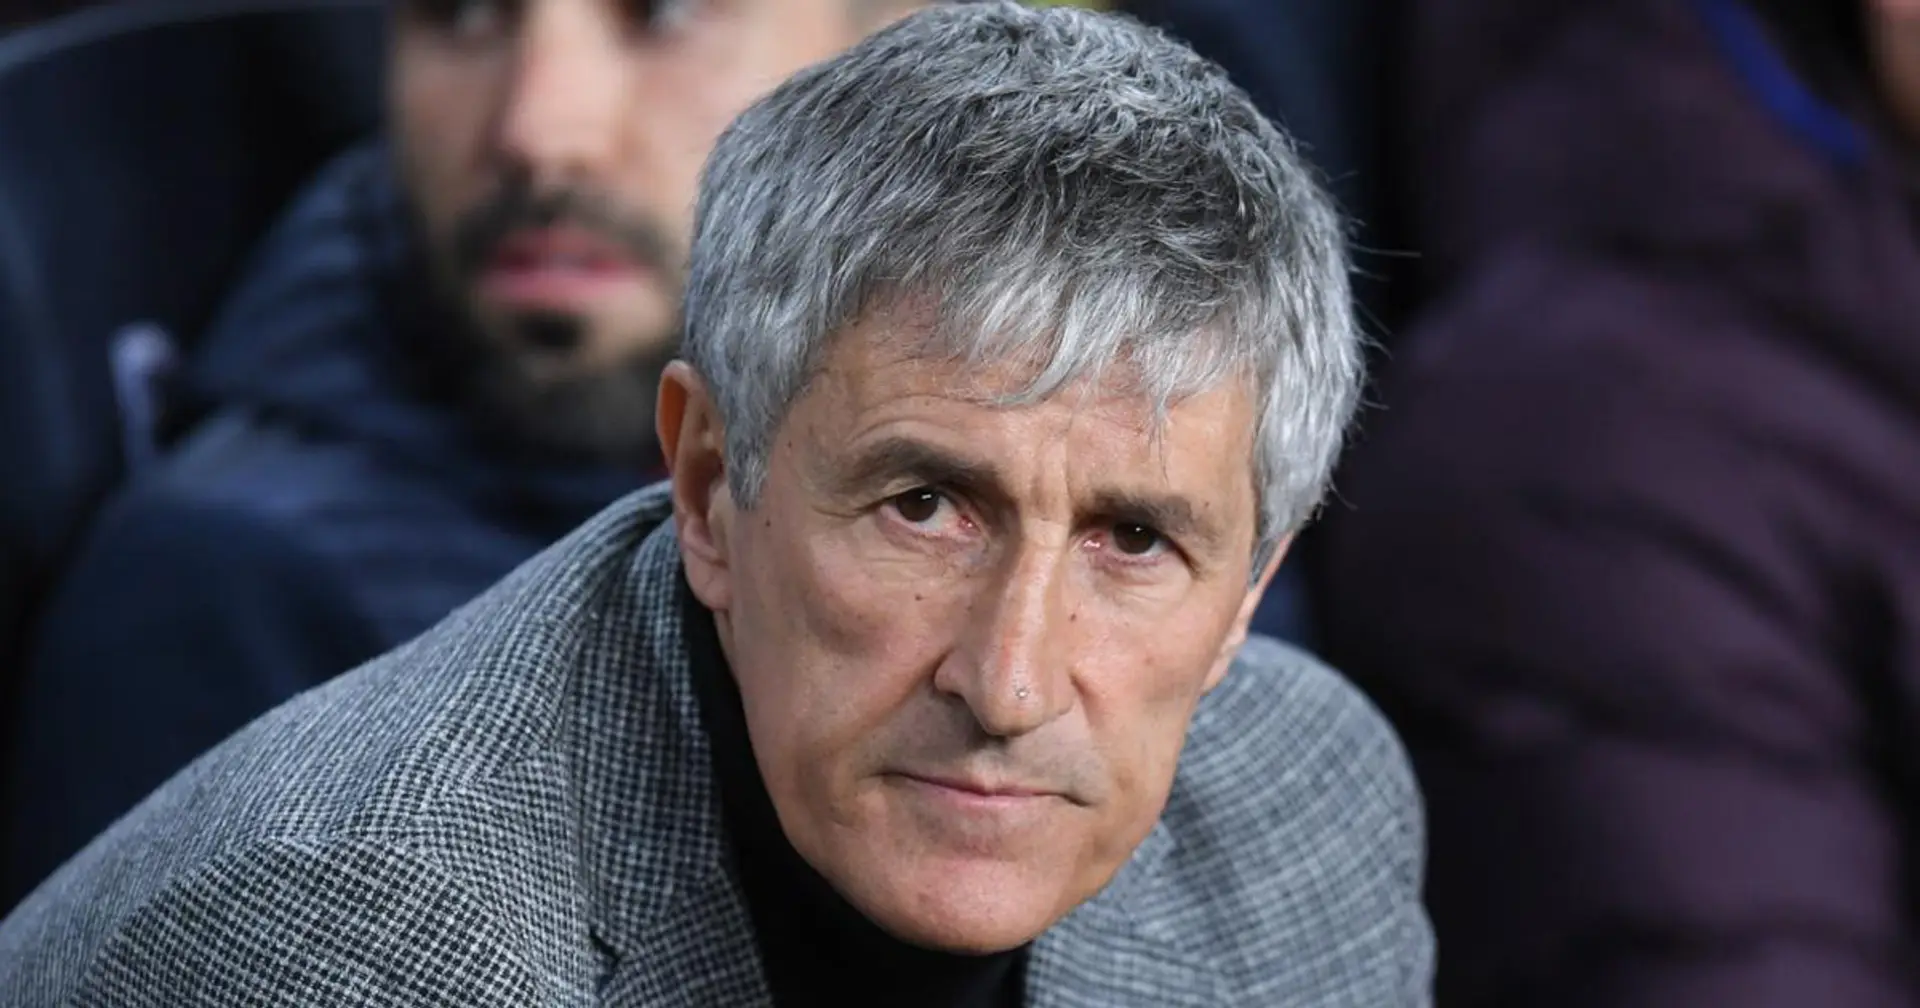 Barcelona reportedly claim that Quique Setien was unqualified for coaching the team: 5-point explainer